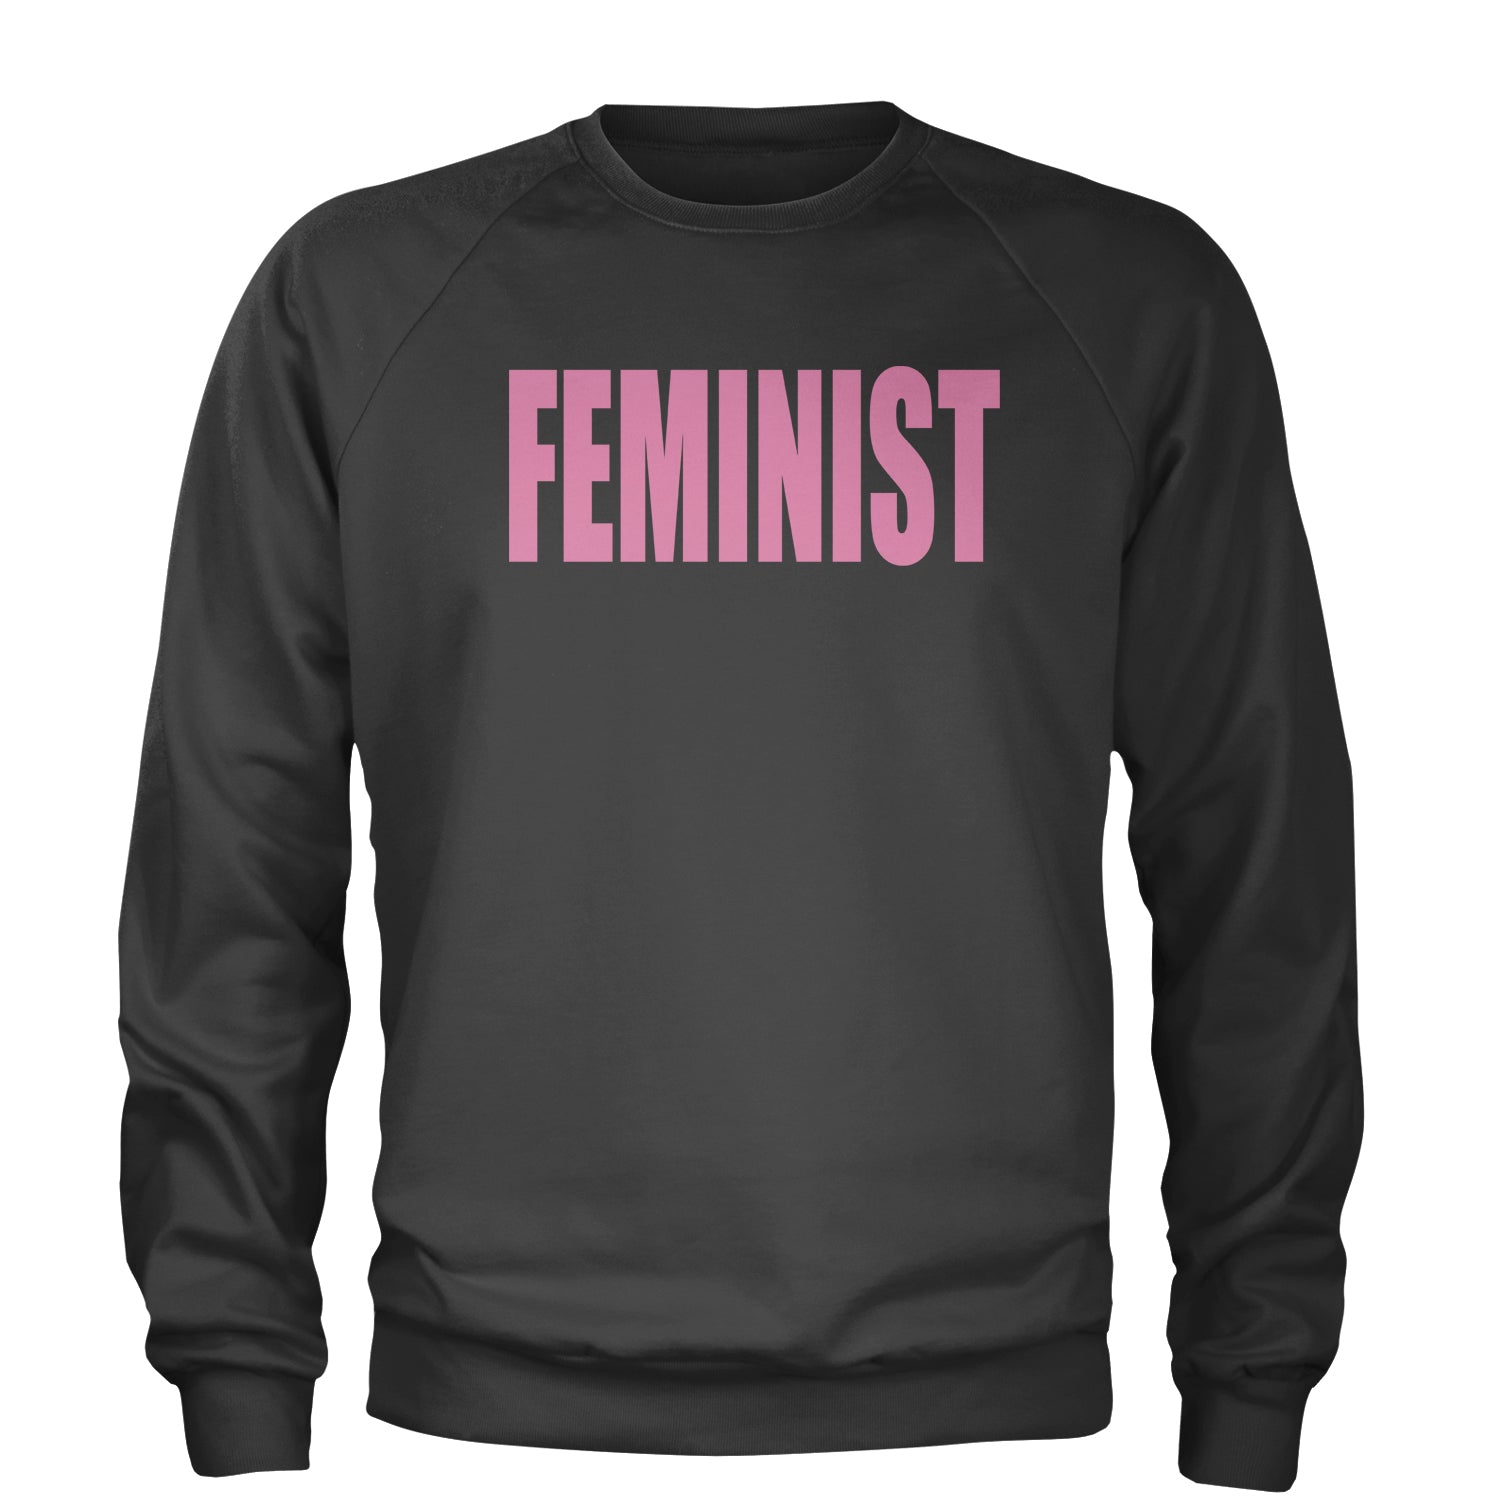 Feminist (Pink Print) Adult Crewneck Sweatshirt a, equal, equality, feminism, feminist, gender, is, lgbtq, like, looks, nevertheless, pay, persisted, rights, she, this, what by Expression Tees